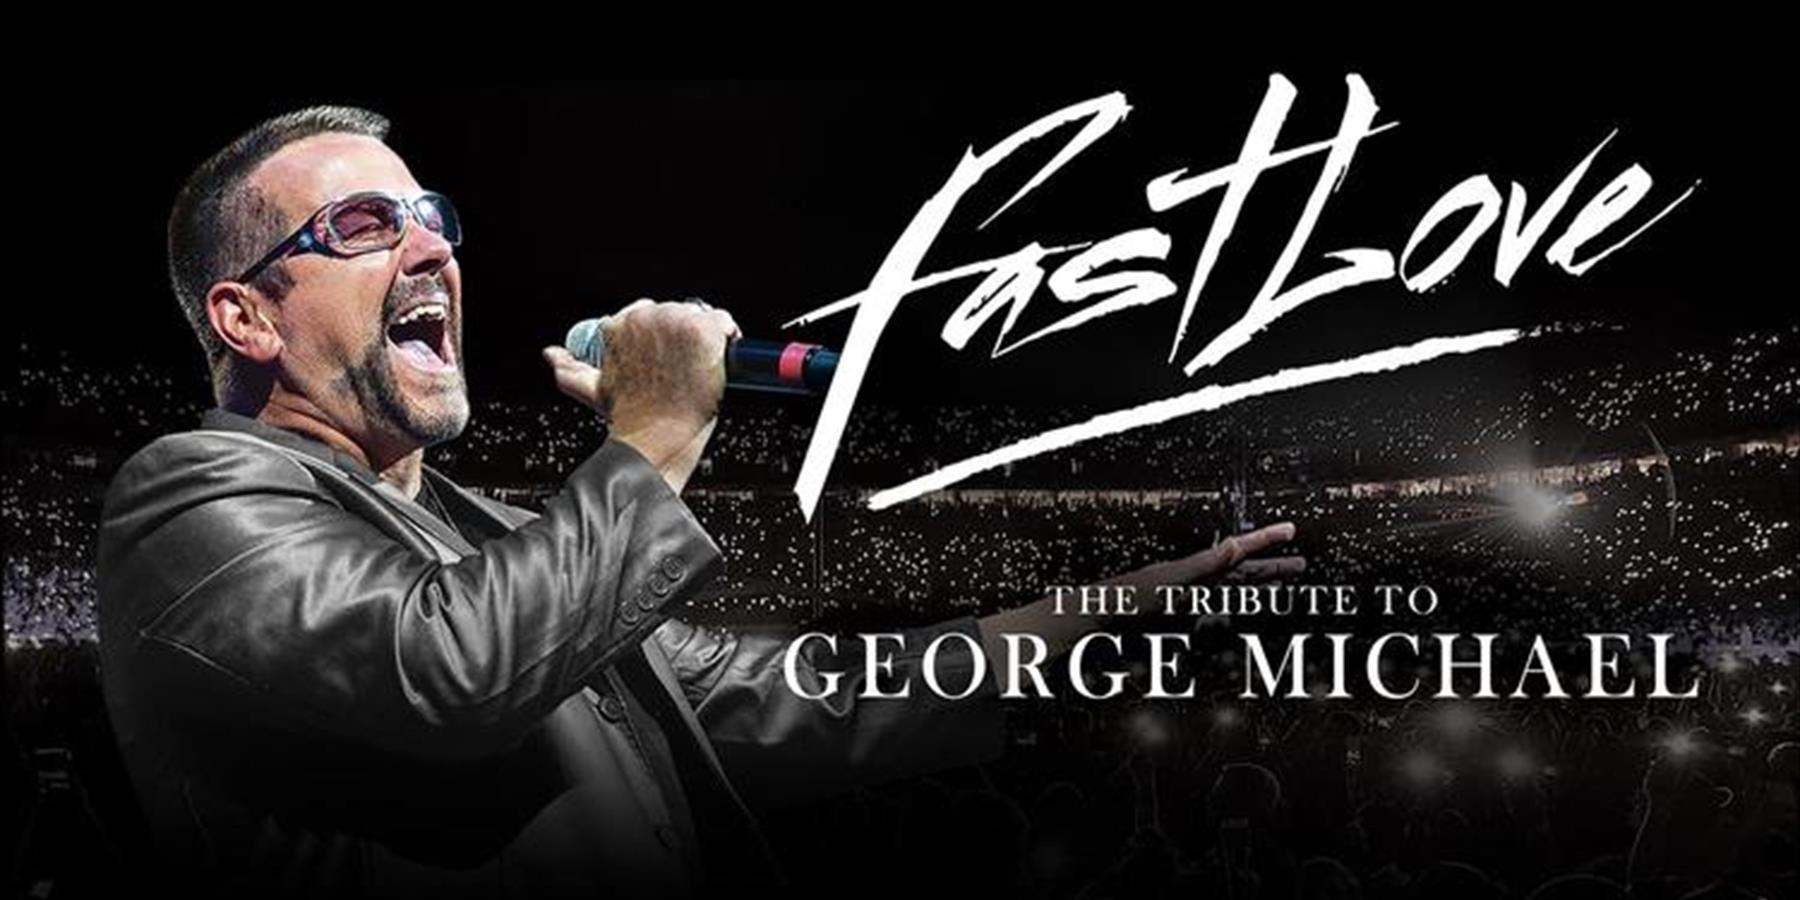 Fastlove: A Tribute to George Michael